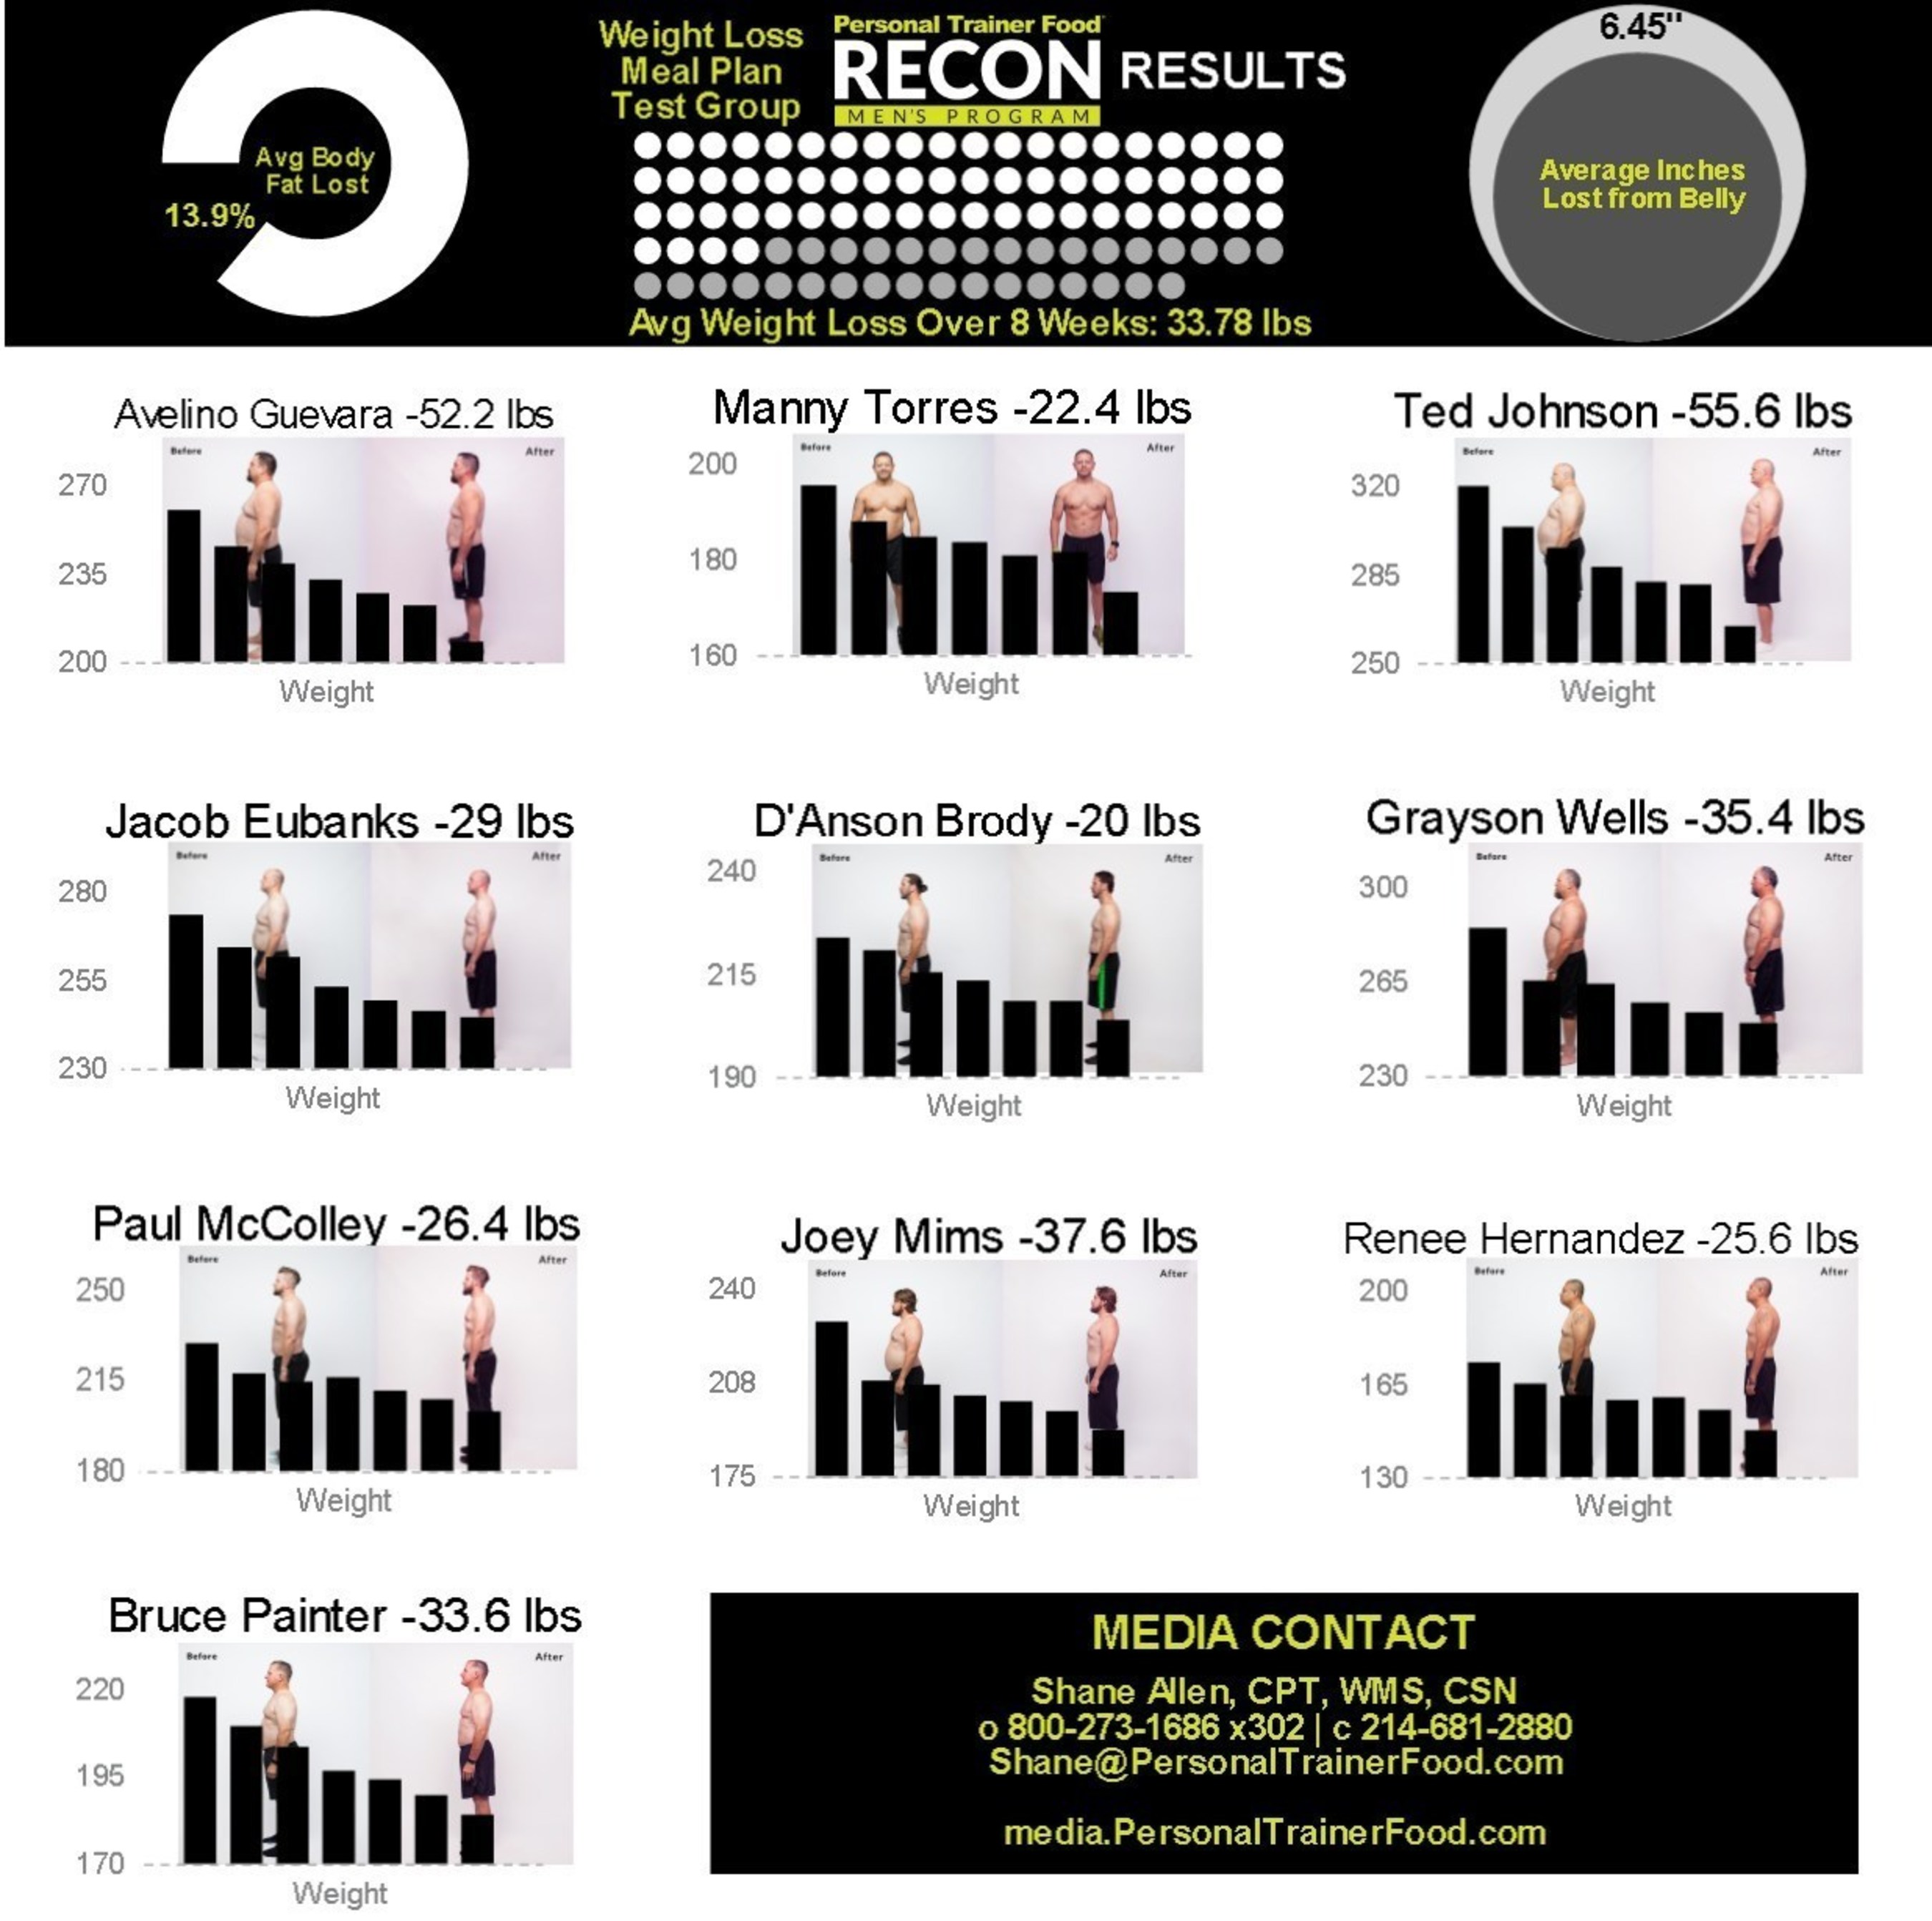 Infographic: Men lose 33.78 lbs over eight weeks using a ketogenic-style diet. Weight loss meal home delivery company Personal Trainer Food has released a new plan just for men called RECON, which reduces starchy carbs and sugars while providing more daily protein than typical meals from Jenny Craig and Nutrisystem combined.